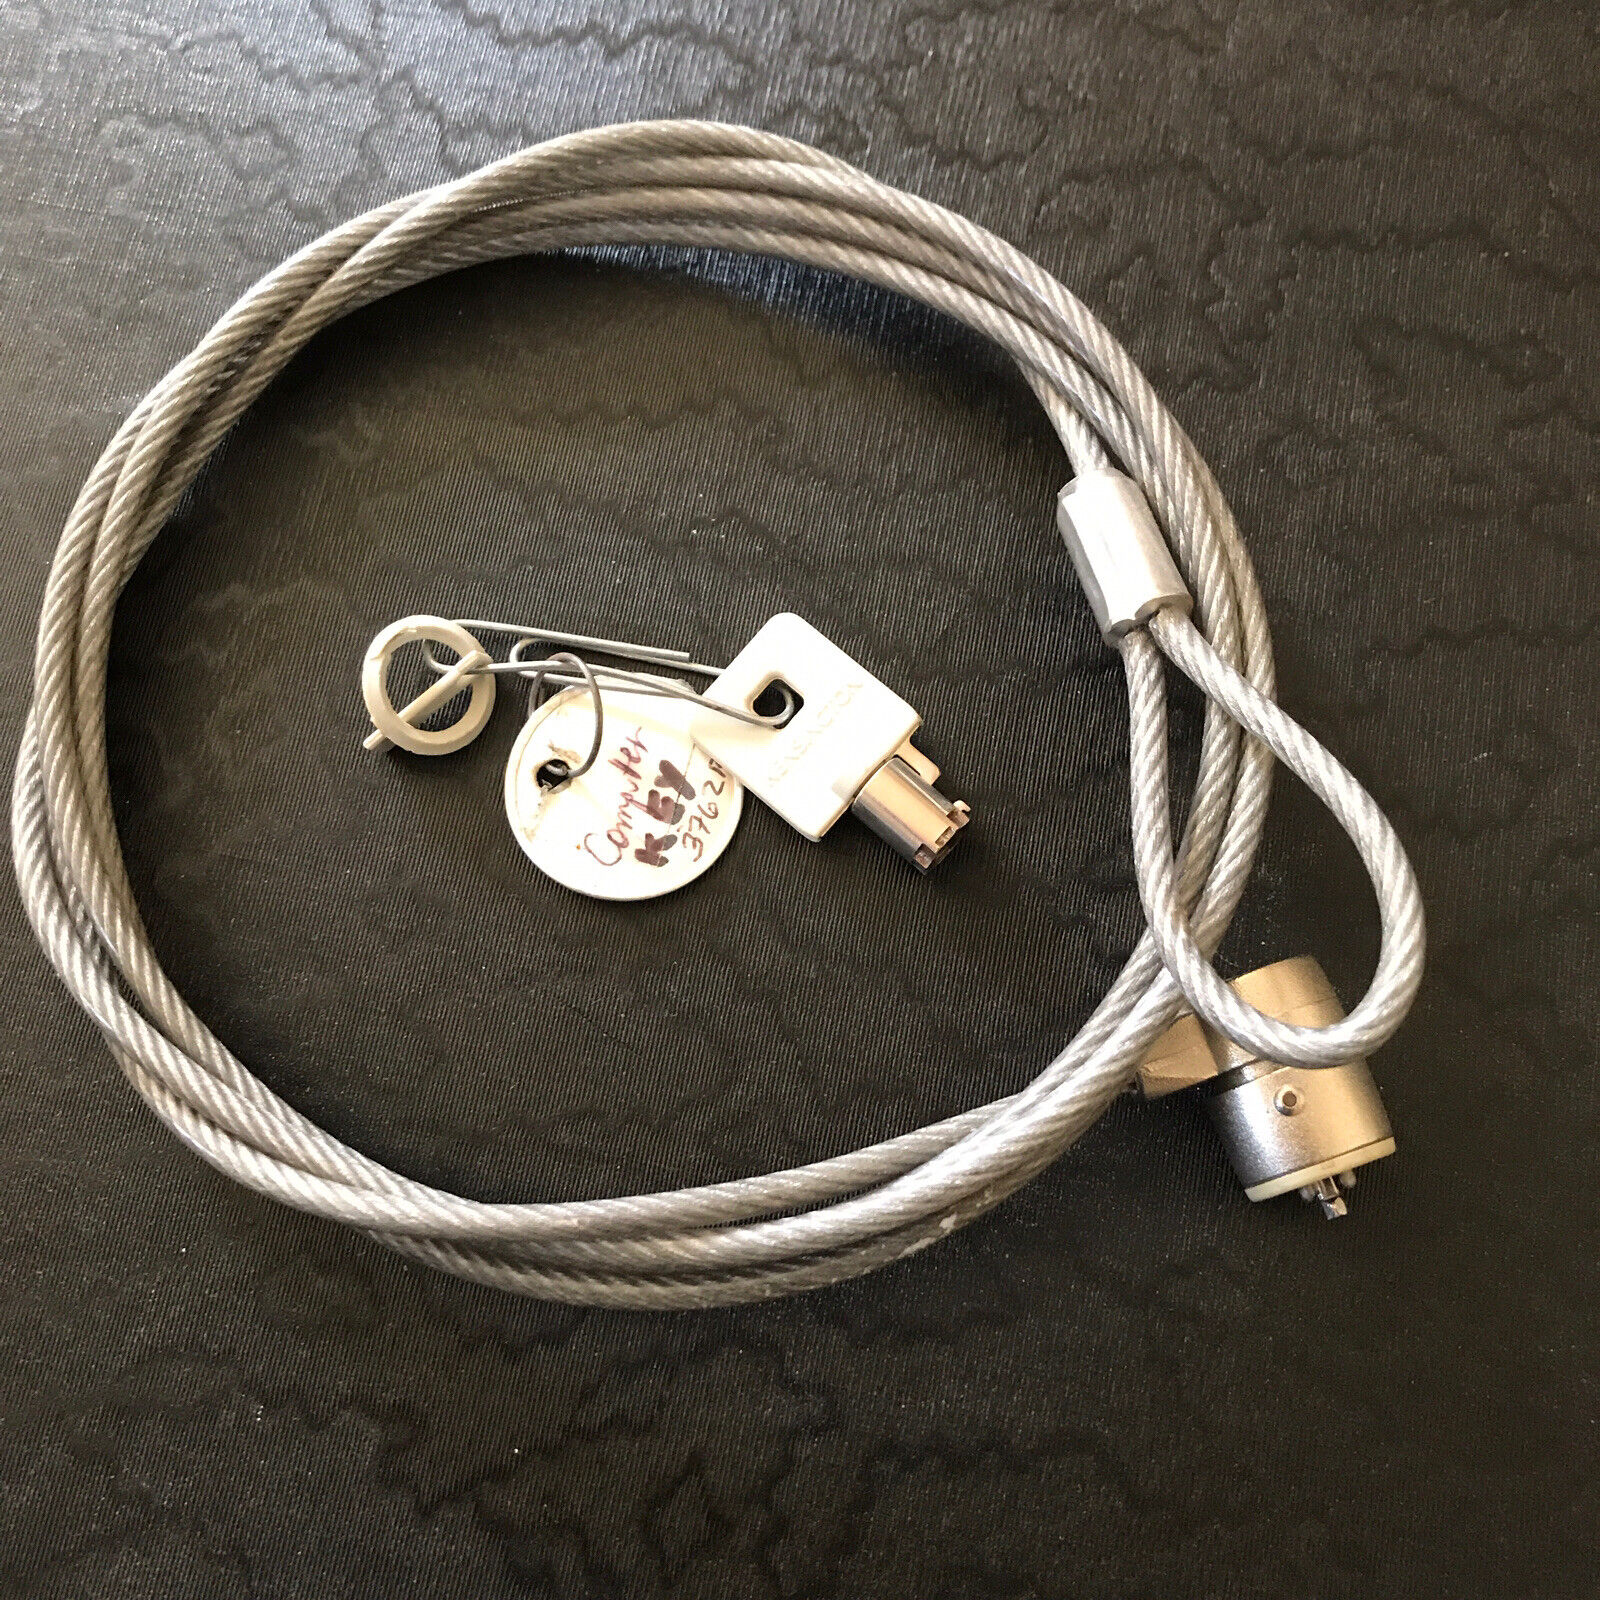 Kensington COMPUTER SECURITY LOCK CABLE for Vintage Laptop or ?   